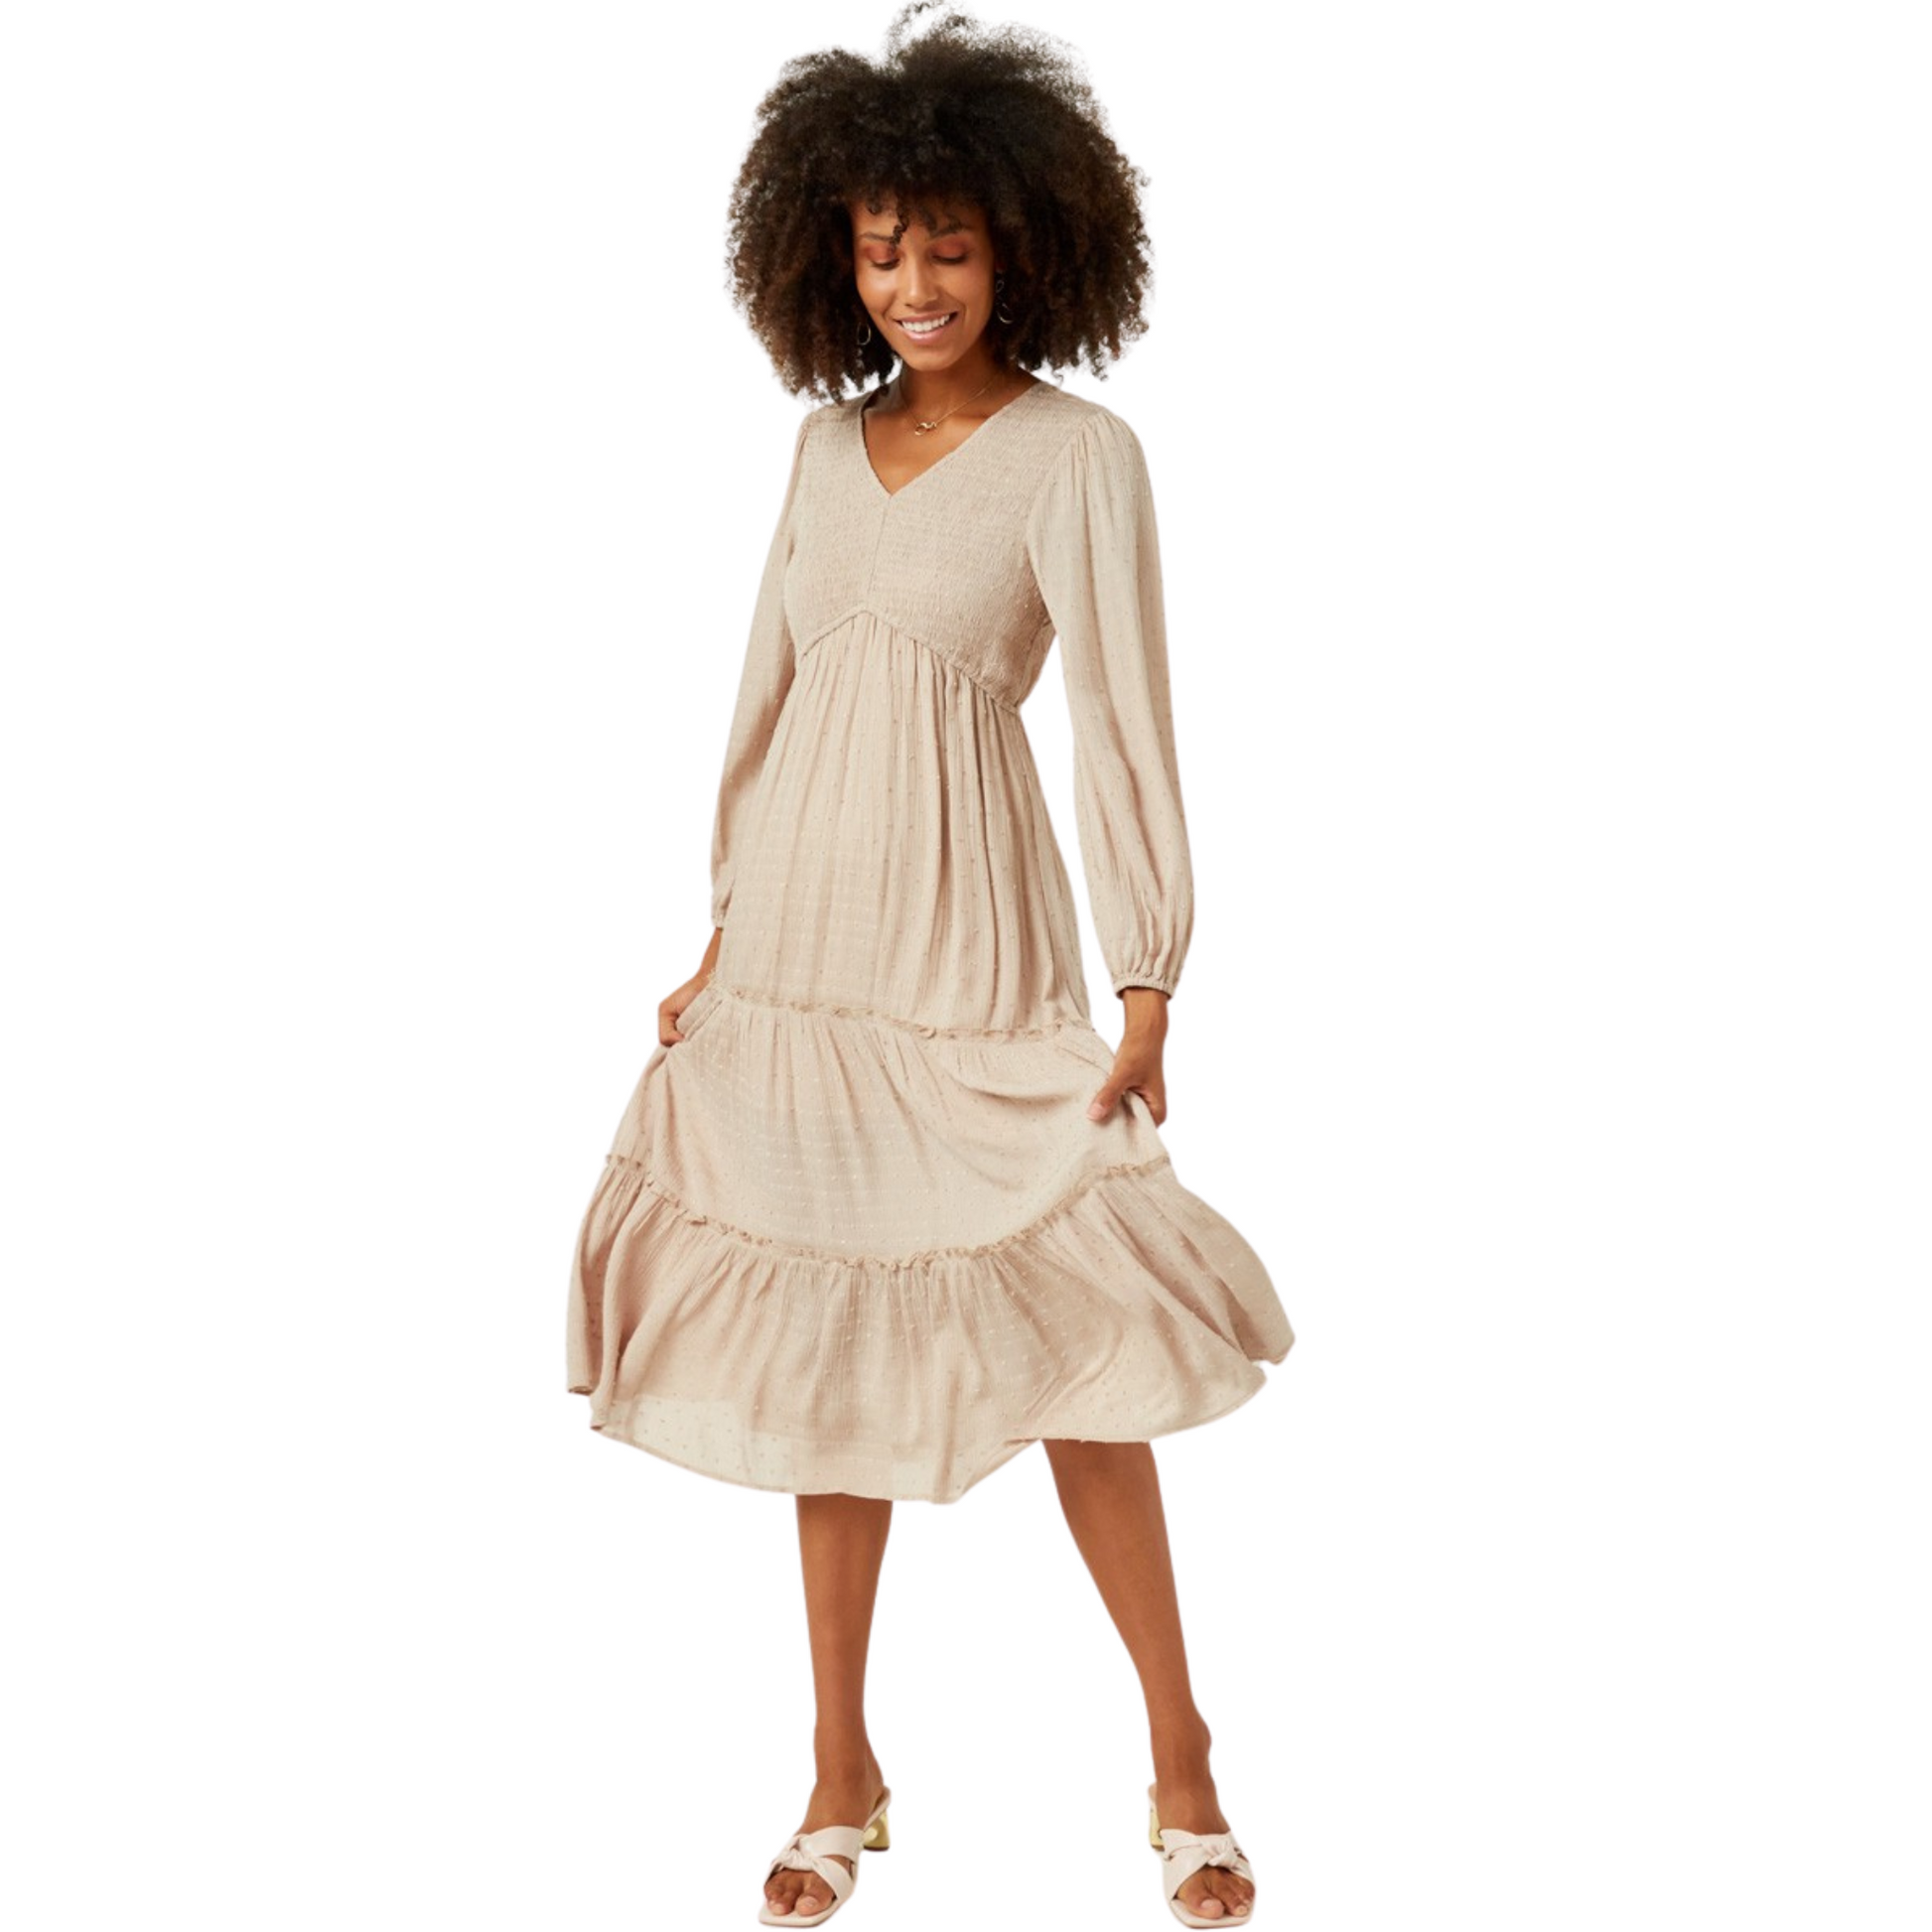 This fashion-forward Swiss dot tiered dress is perfect for any occasion. Made of lightweight woven fabric, this cream-colored maxi dress features a flattering v-neckline, back keyhole closure, and a dress lining for added comfort. Enjoy a feminine and timeless look!